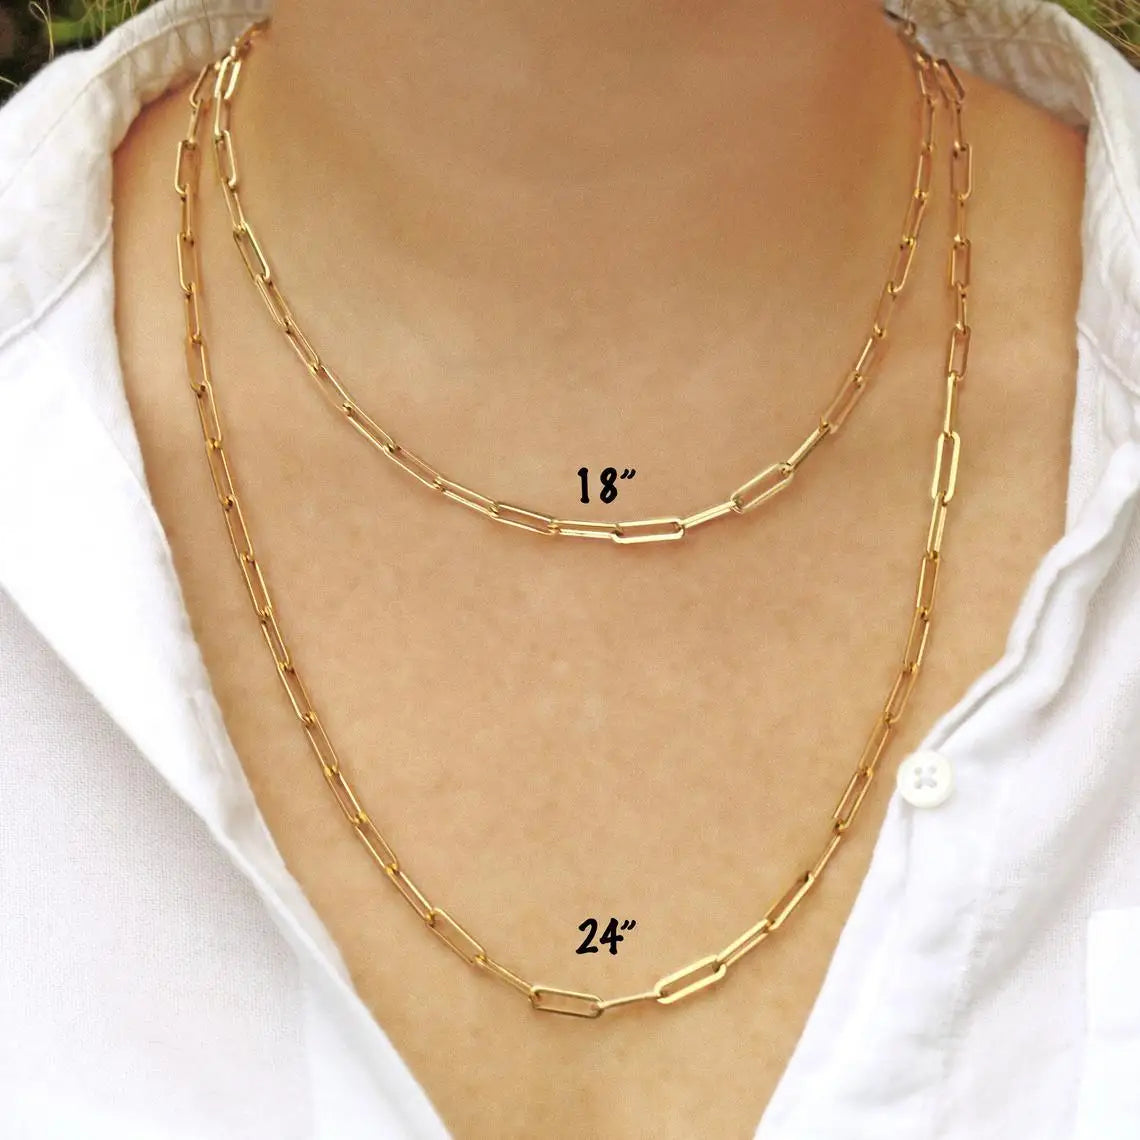 2021 Hot Fashion Paperclip Link Chain Women Necklace Stainless